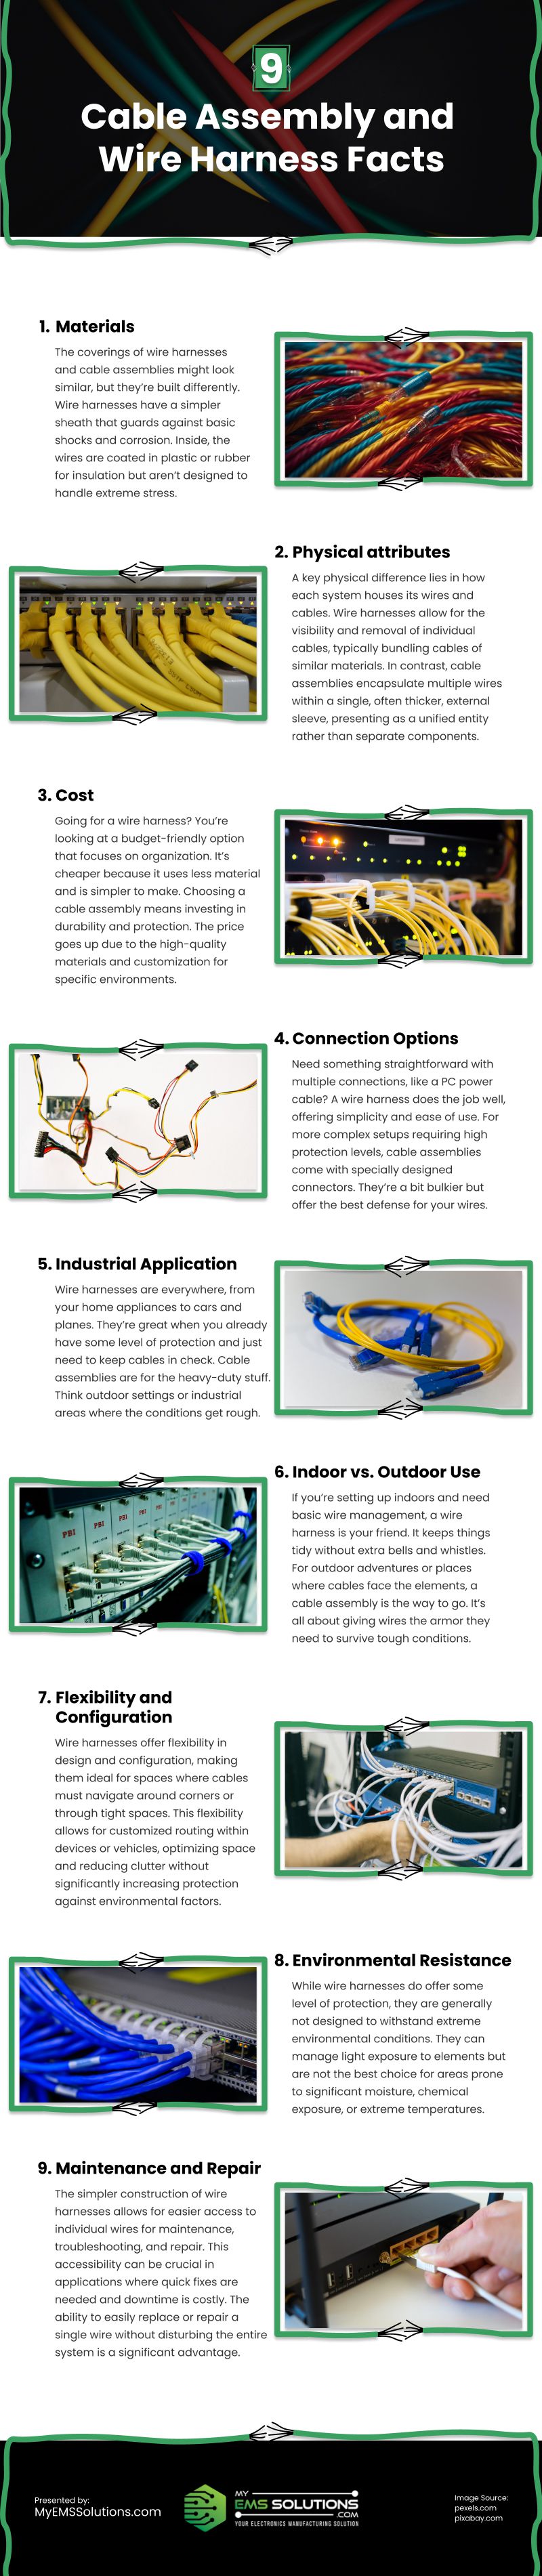 9 Cable Assembly and Wire Harness Facts Infographic